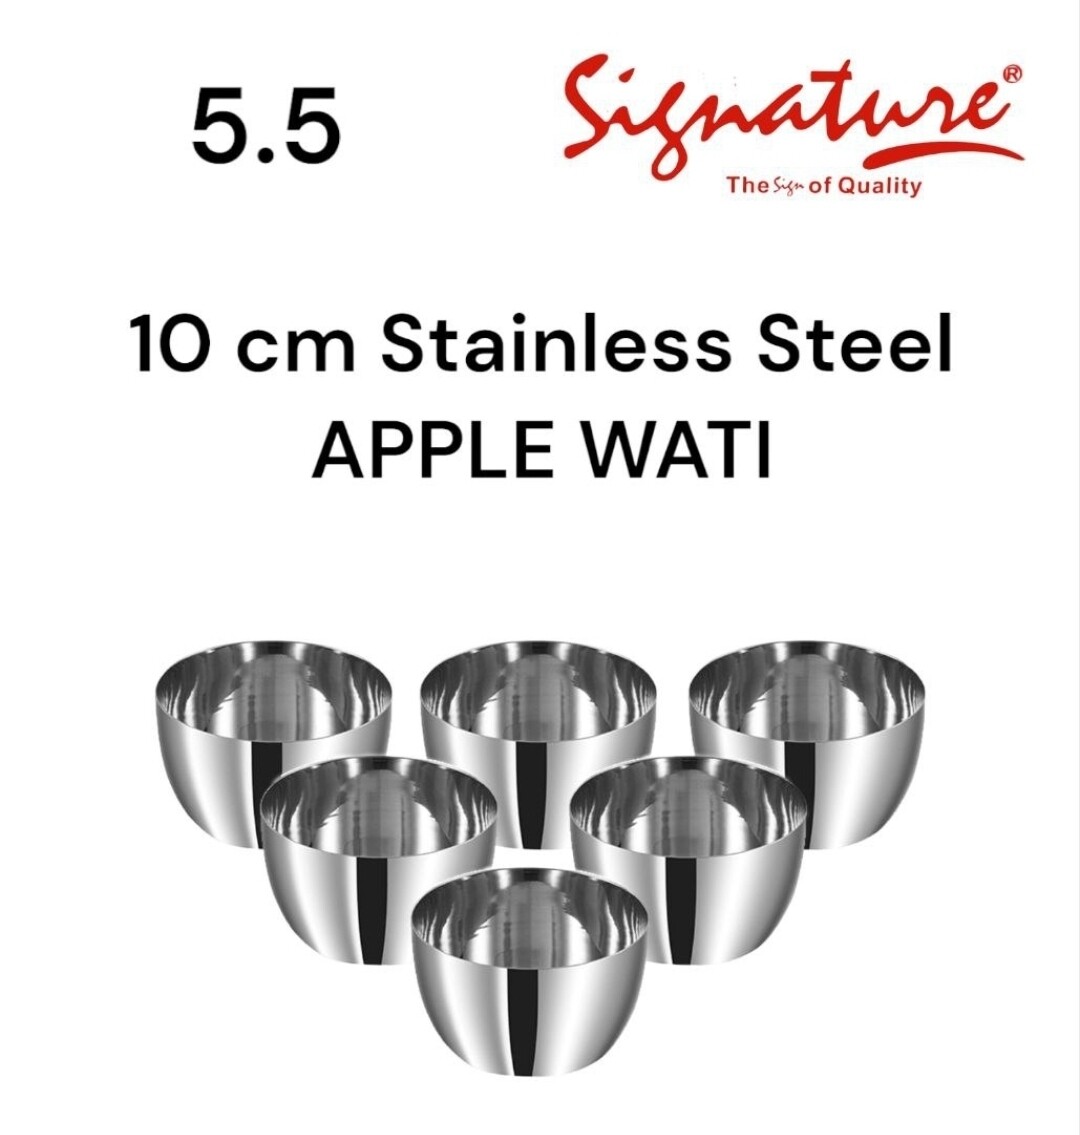 Signature 10cm stainless steel apple bowls